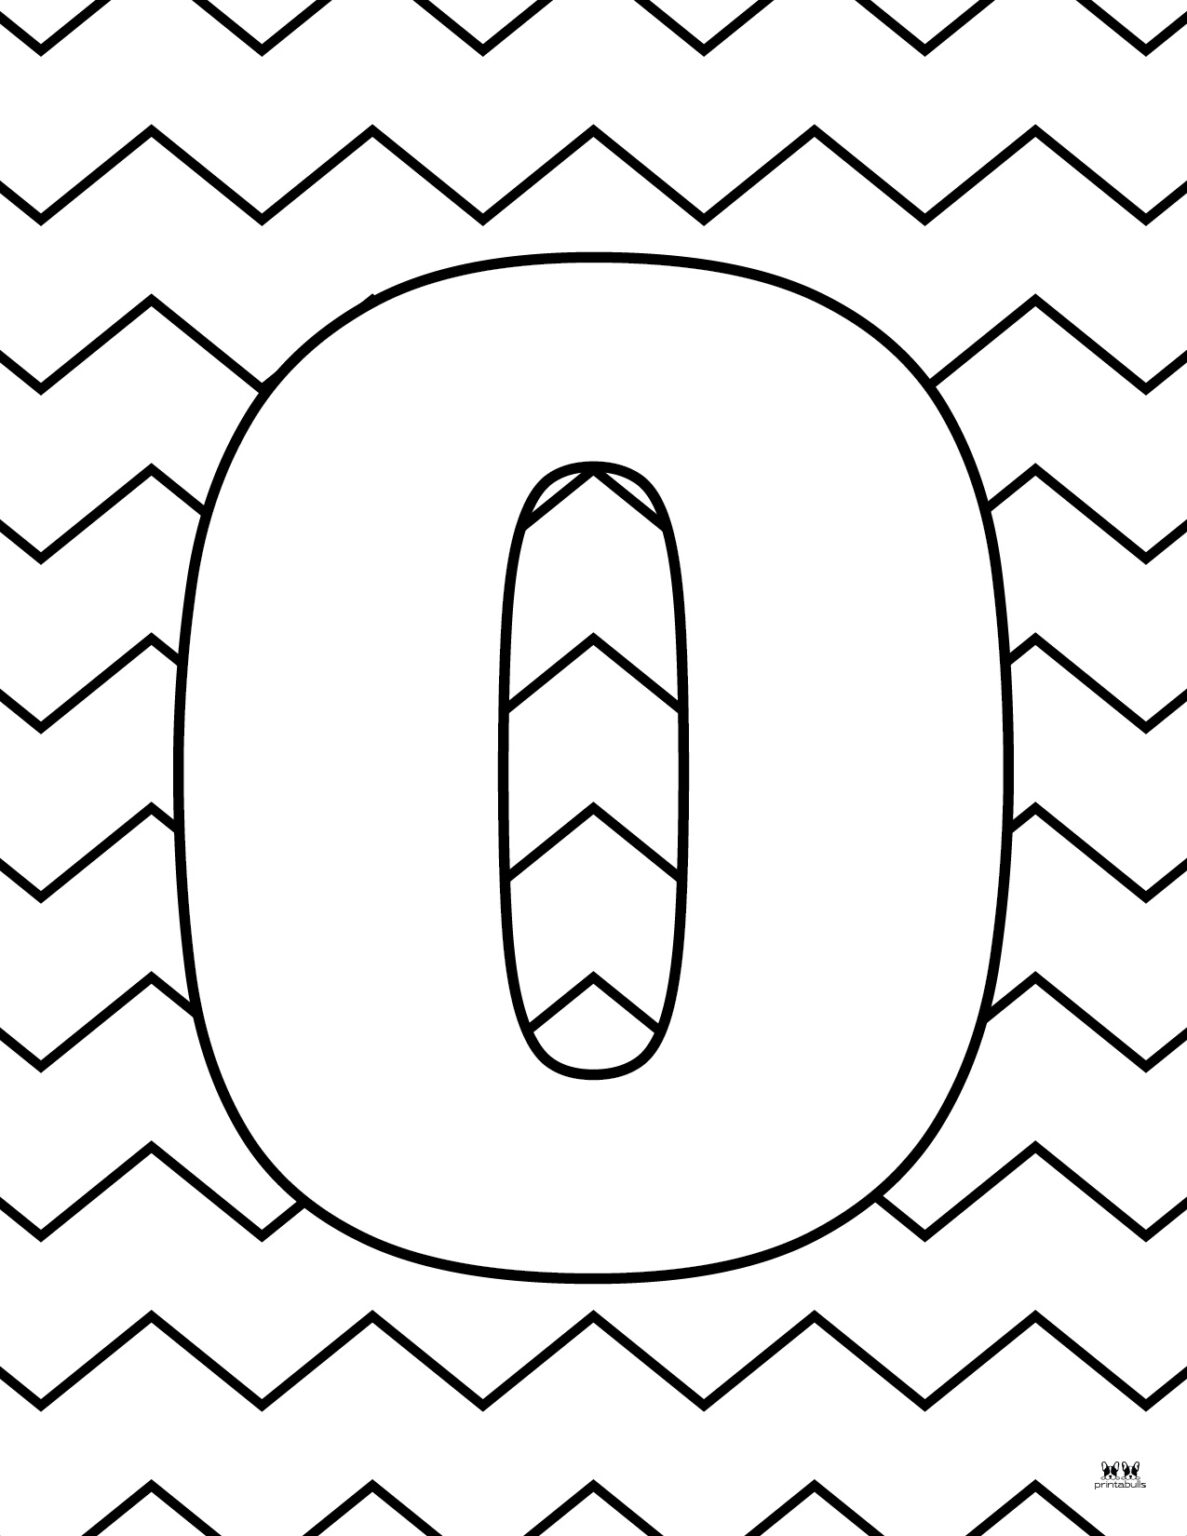 letter-o-coloring-pages-15-free-pages-printabulls